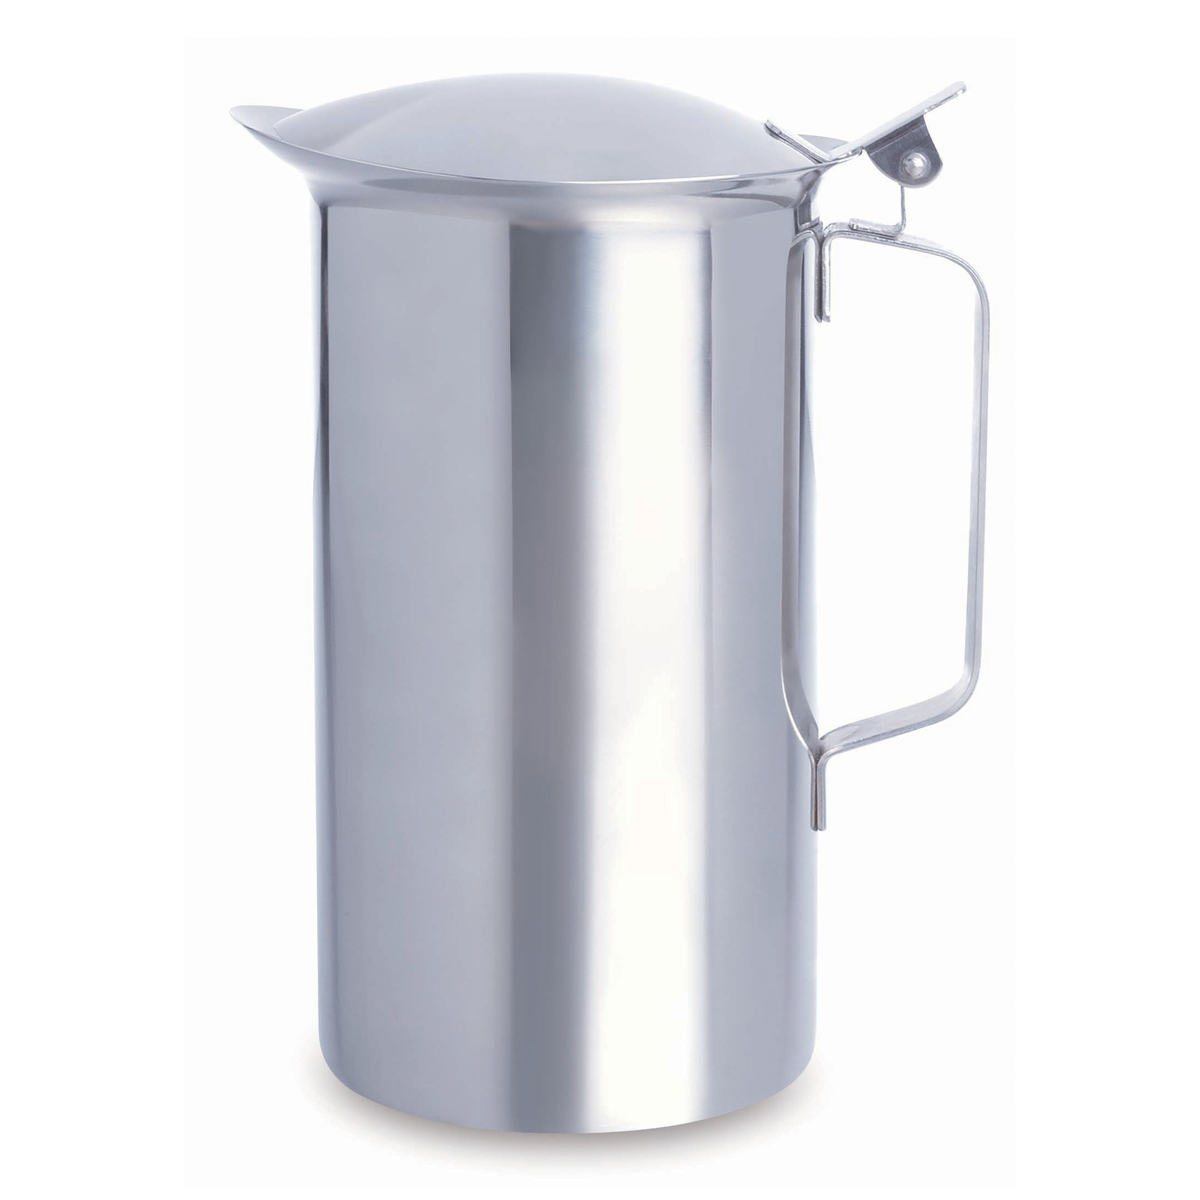 Zebra Stainless Steel Water Jug with Lid, 11 cm, 115012